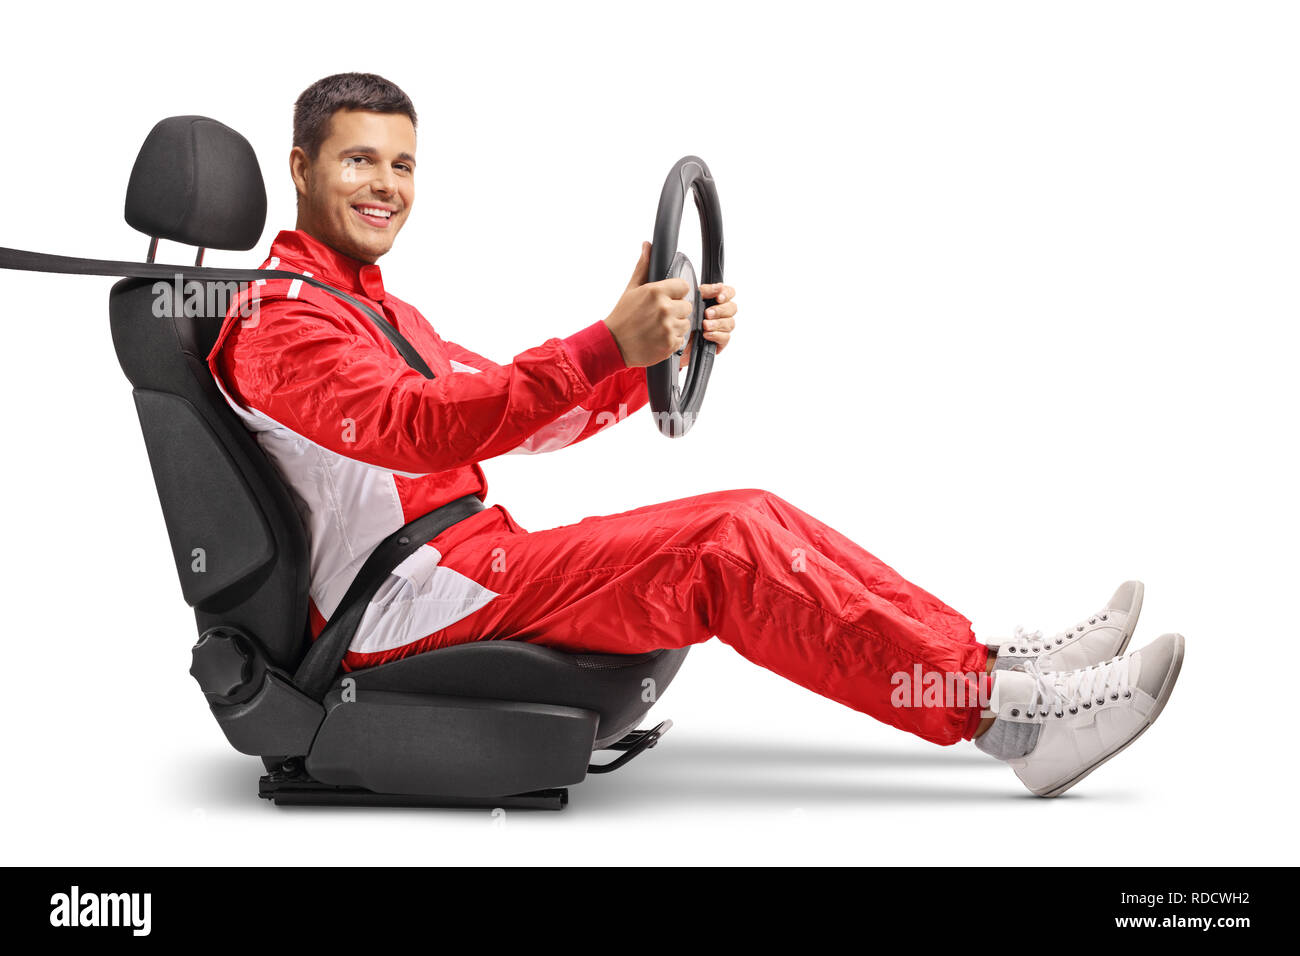 Full length shot of a male racer in a car seat holding a steering wheel and smiling at the camera isolated on white background Stock Photo